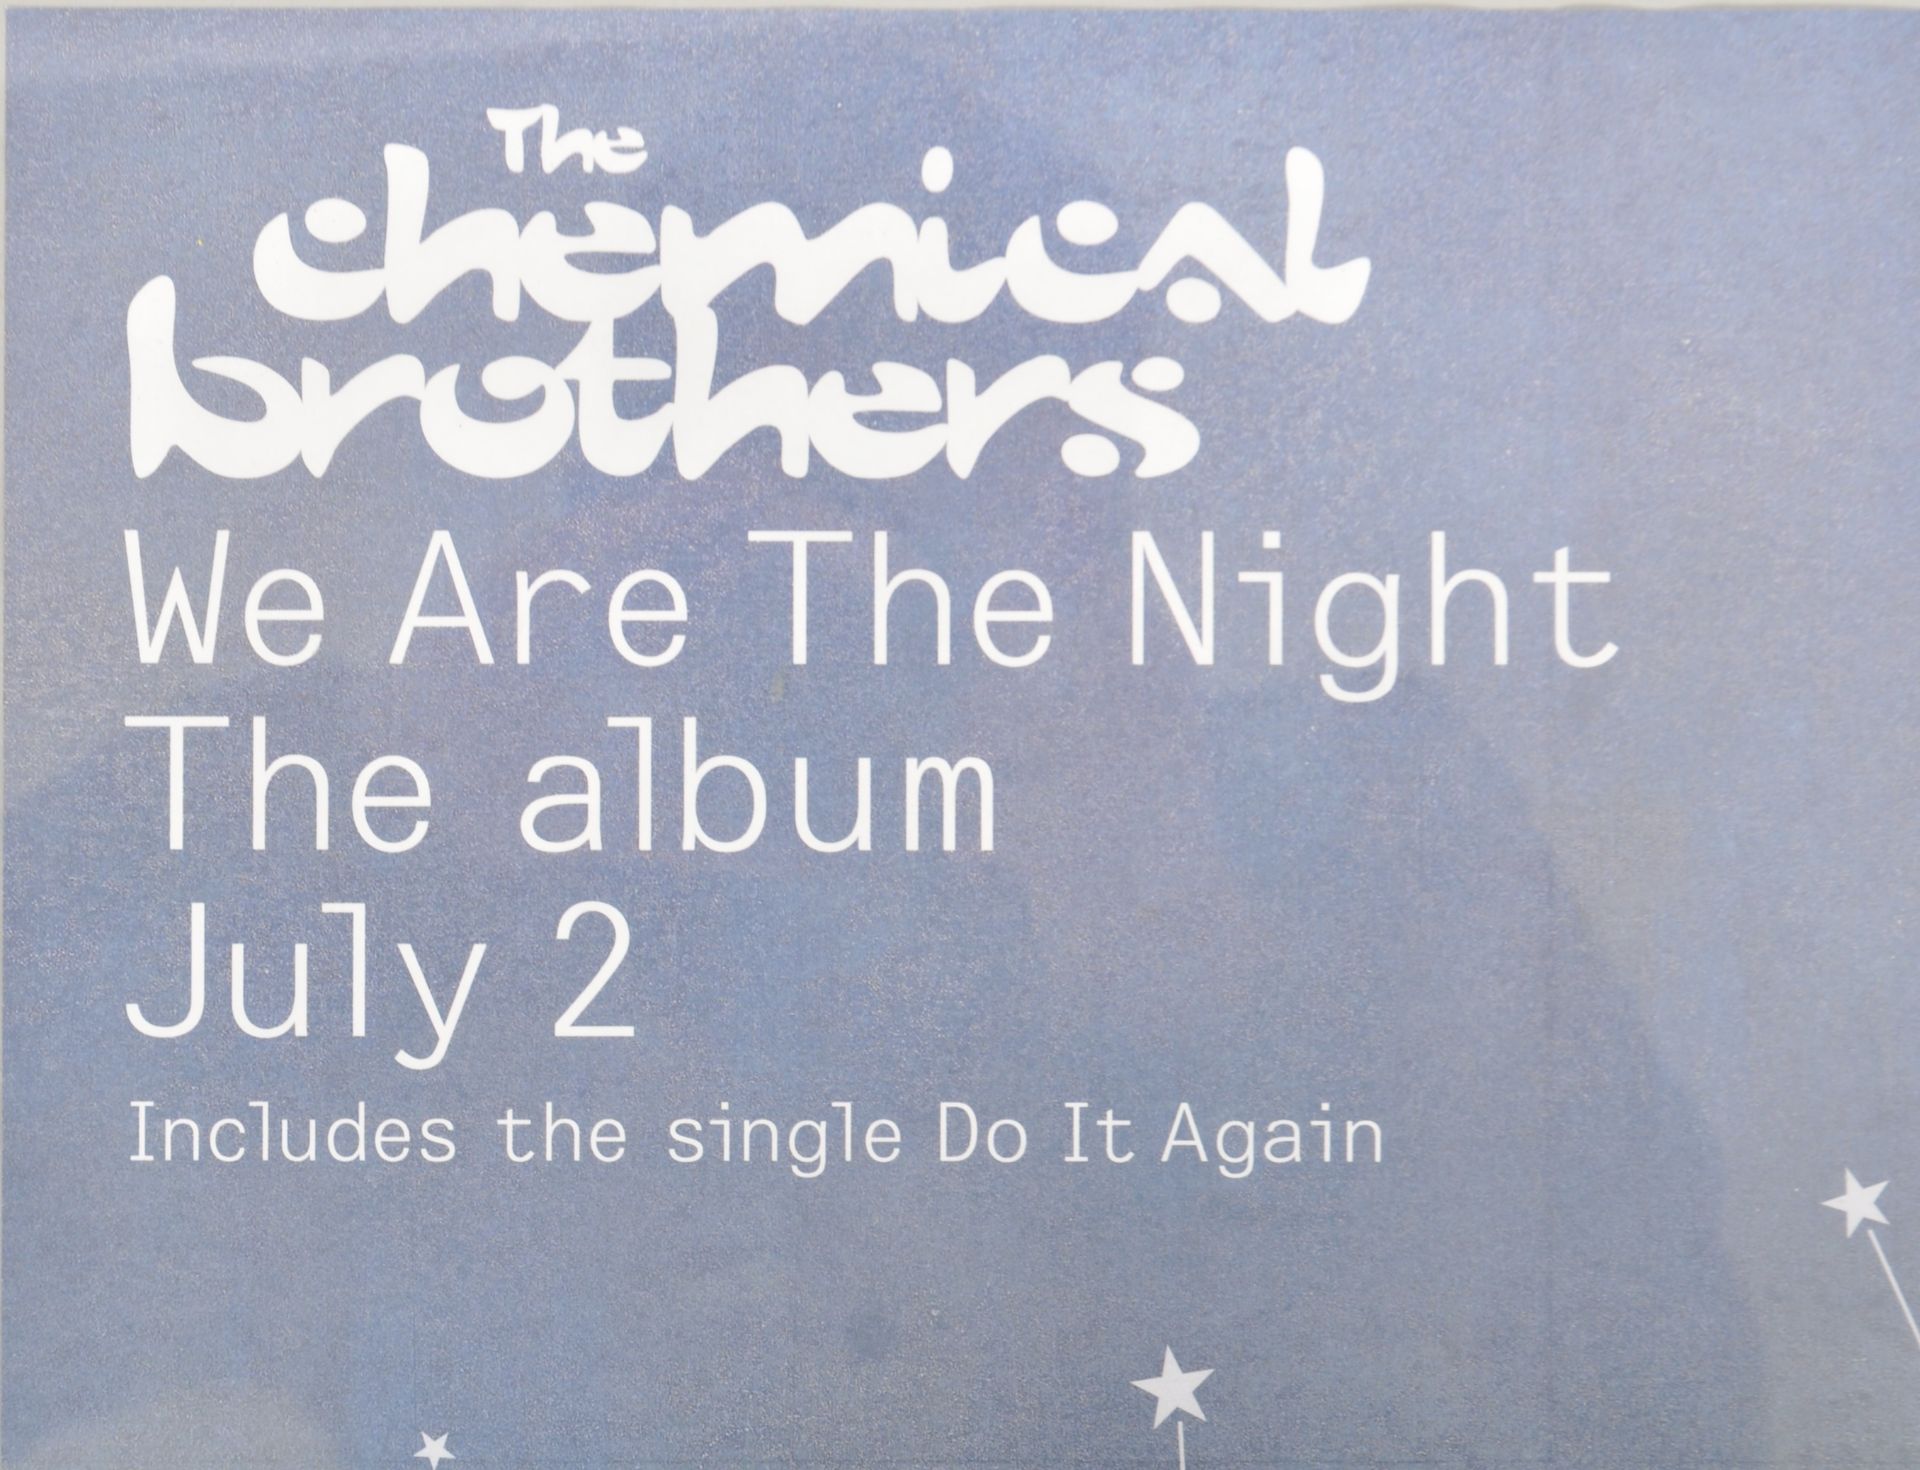 THE CHEMICAL BROTHERS - PROMOTIONAL MUSIC POSTER - Image 2 of 4